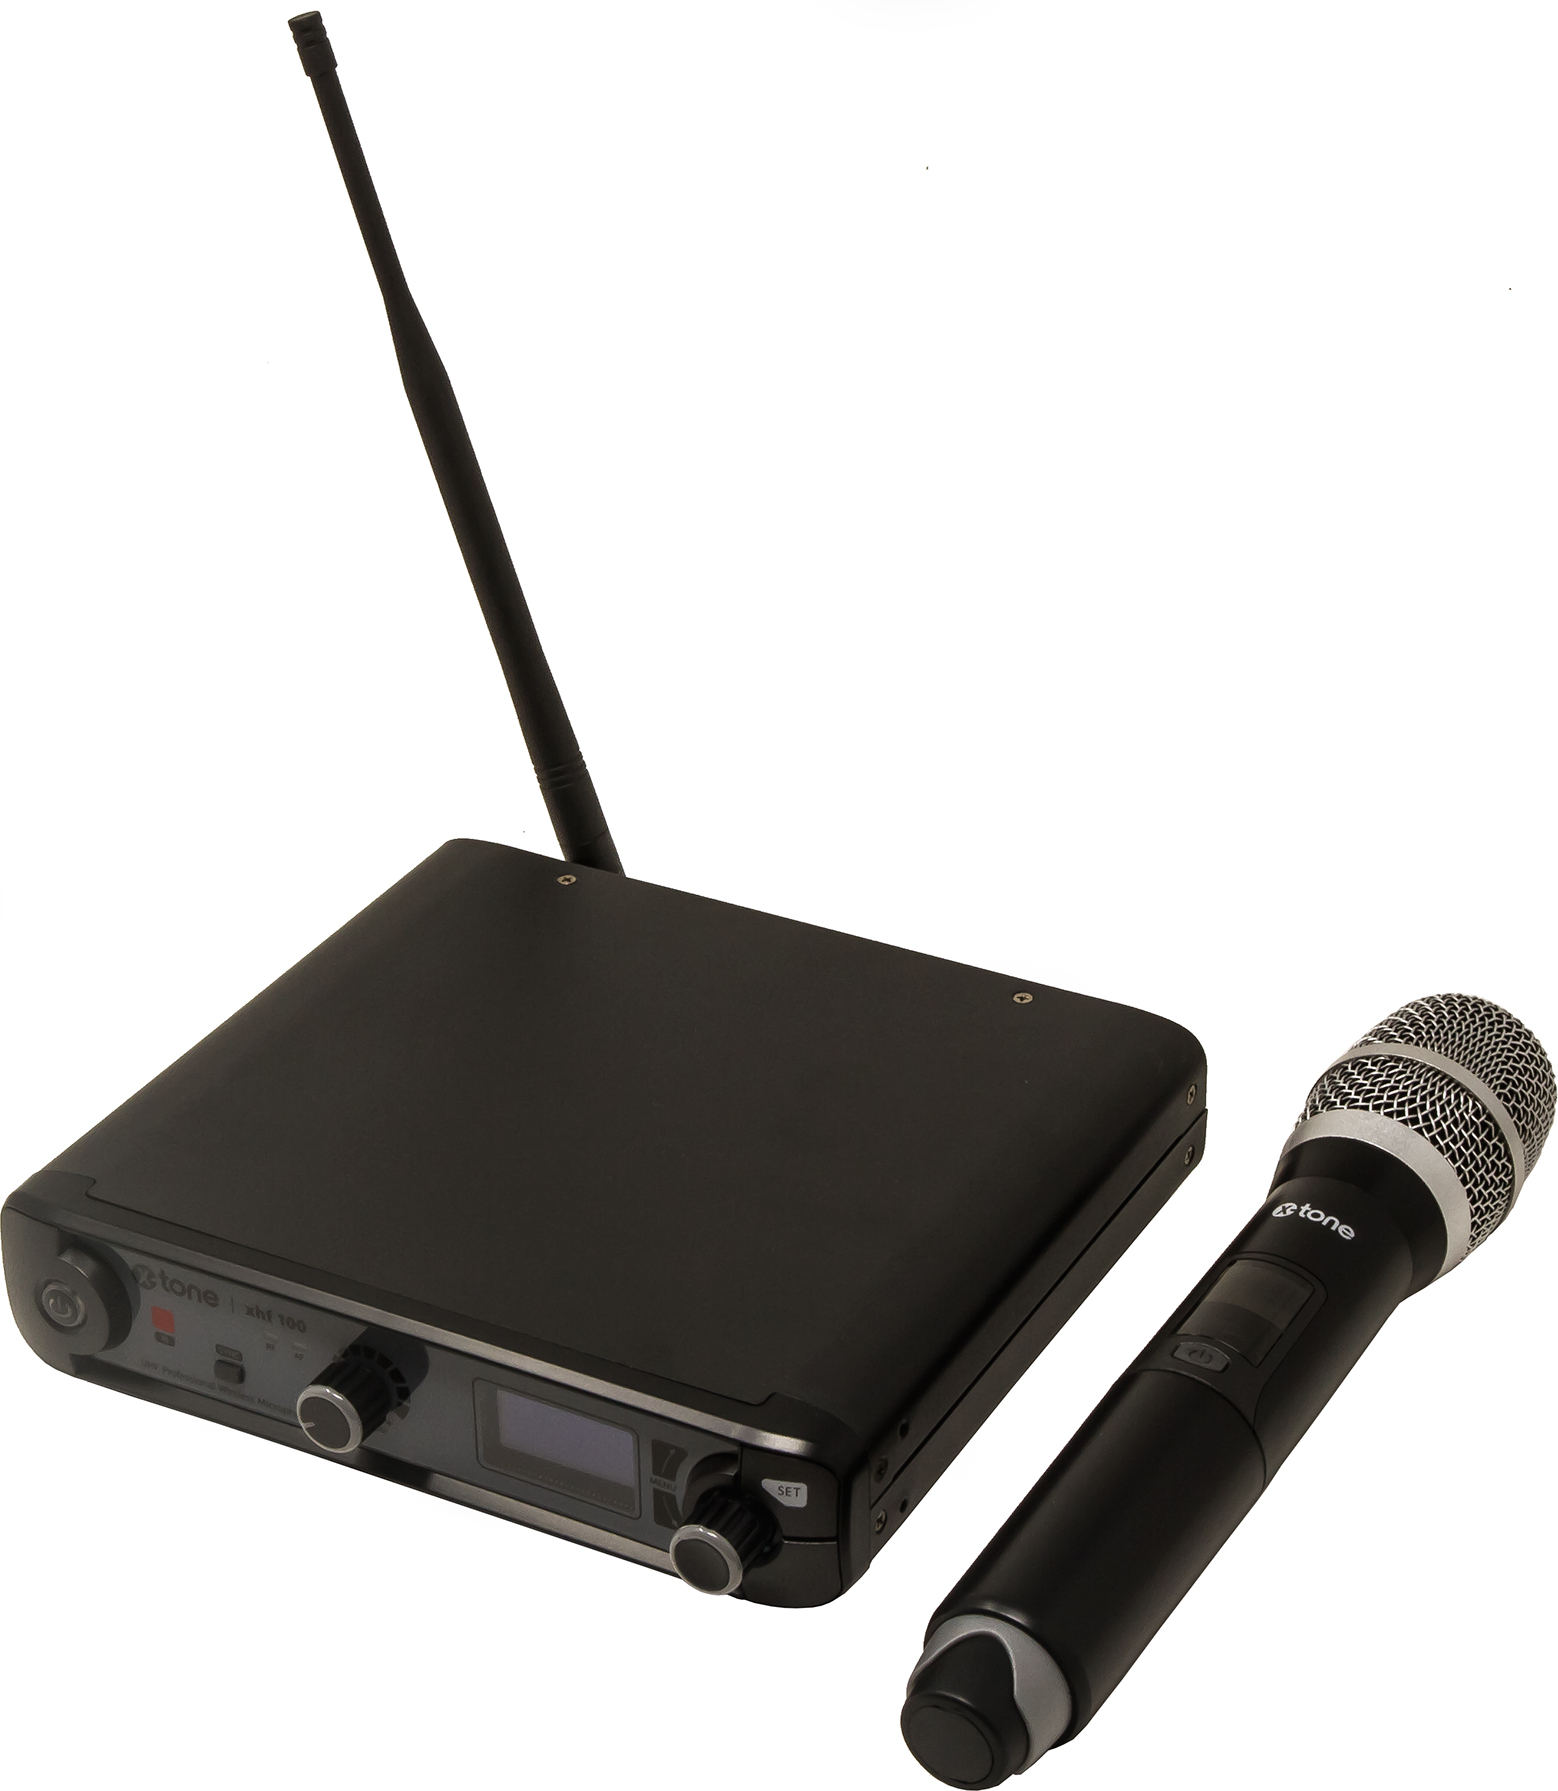 X-tone Xhf100 Systeme Hf Main Frequence Fixe - Wireless handheld microphone - Main picture